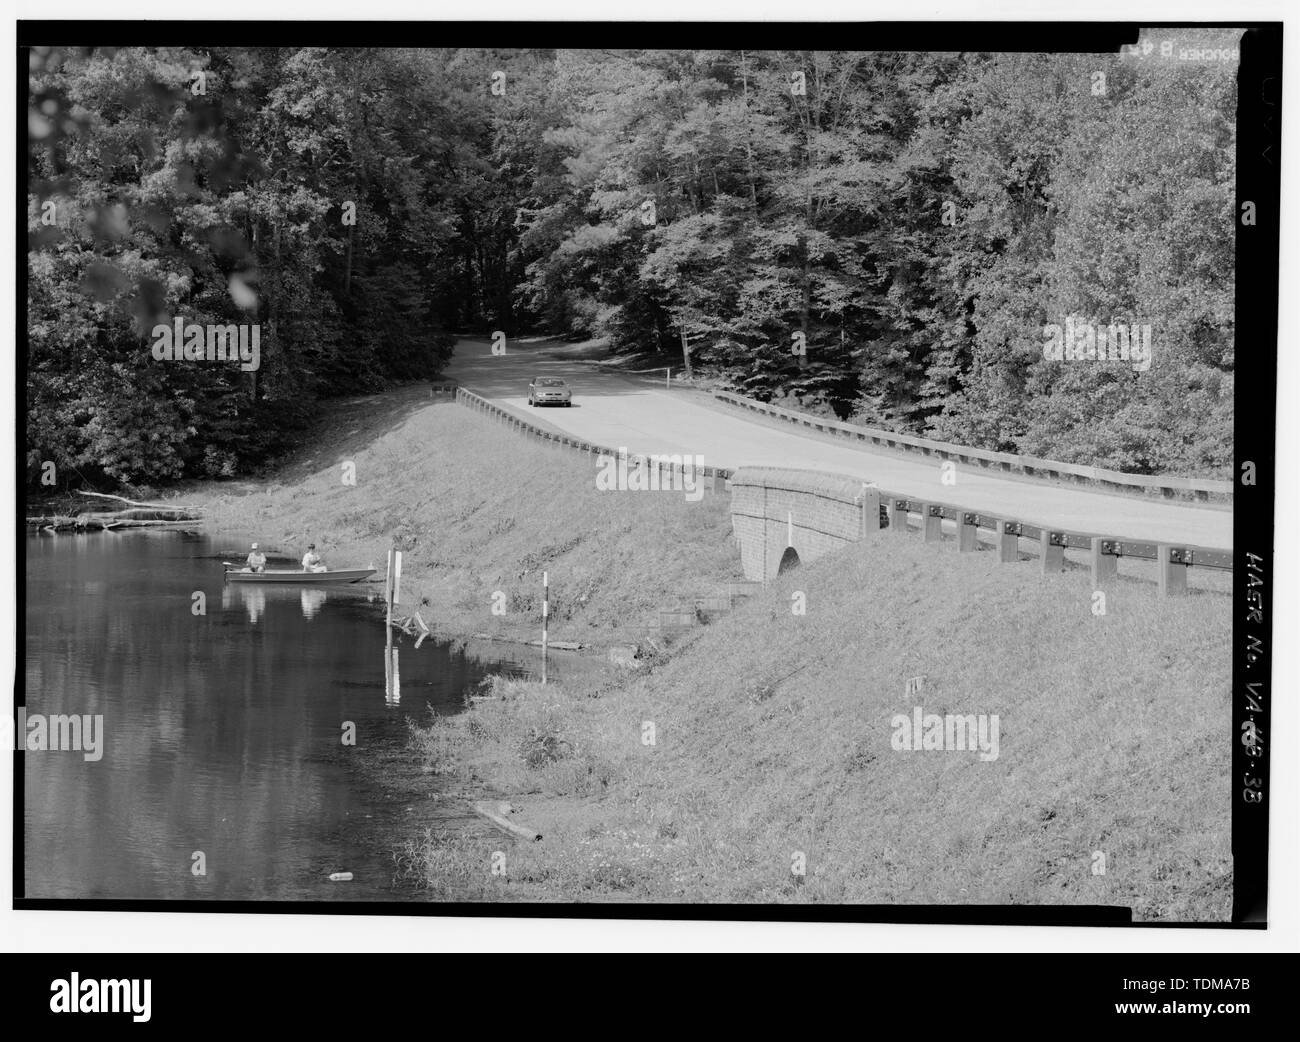 PARTIAL VIEW FROM SOUTHEAST OF JONES MILL POND DAM. - Colonial Parkway, Yorktown to Jamestown Island, Yorktown, York County, VA; Cramton, Louis C; Wilbur, Ray Lyman; Hoover, Herbert; Taylor, Oliver G; Peterson, Charles E; Smith, William H; Robinson, William; T E Ritter Company; Thomason, C Y; J G Attaway Construction Company; Wescott, Frank T; Tee, Nello D; A N Campbell and Company; Arundel Corporation; P T Withers; Sanford and Brooks, Company; Roberts Paving Company; Malpass Construction Company; W E Graham and Sons; Rea Construction Company; Scott, W H; Case Construction Company; Triotino an Stock Photo